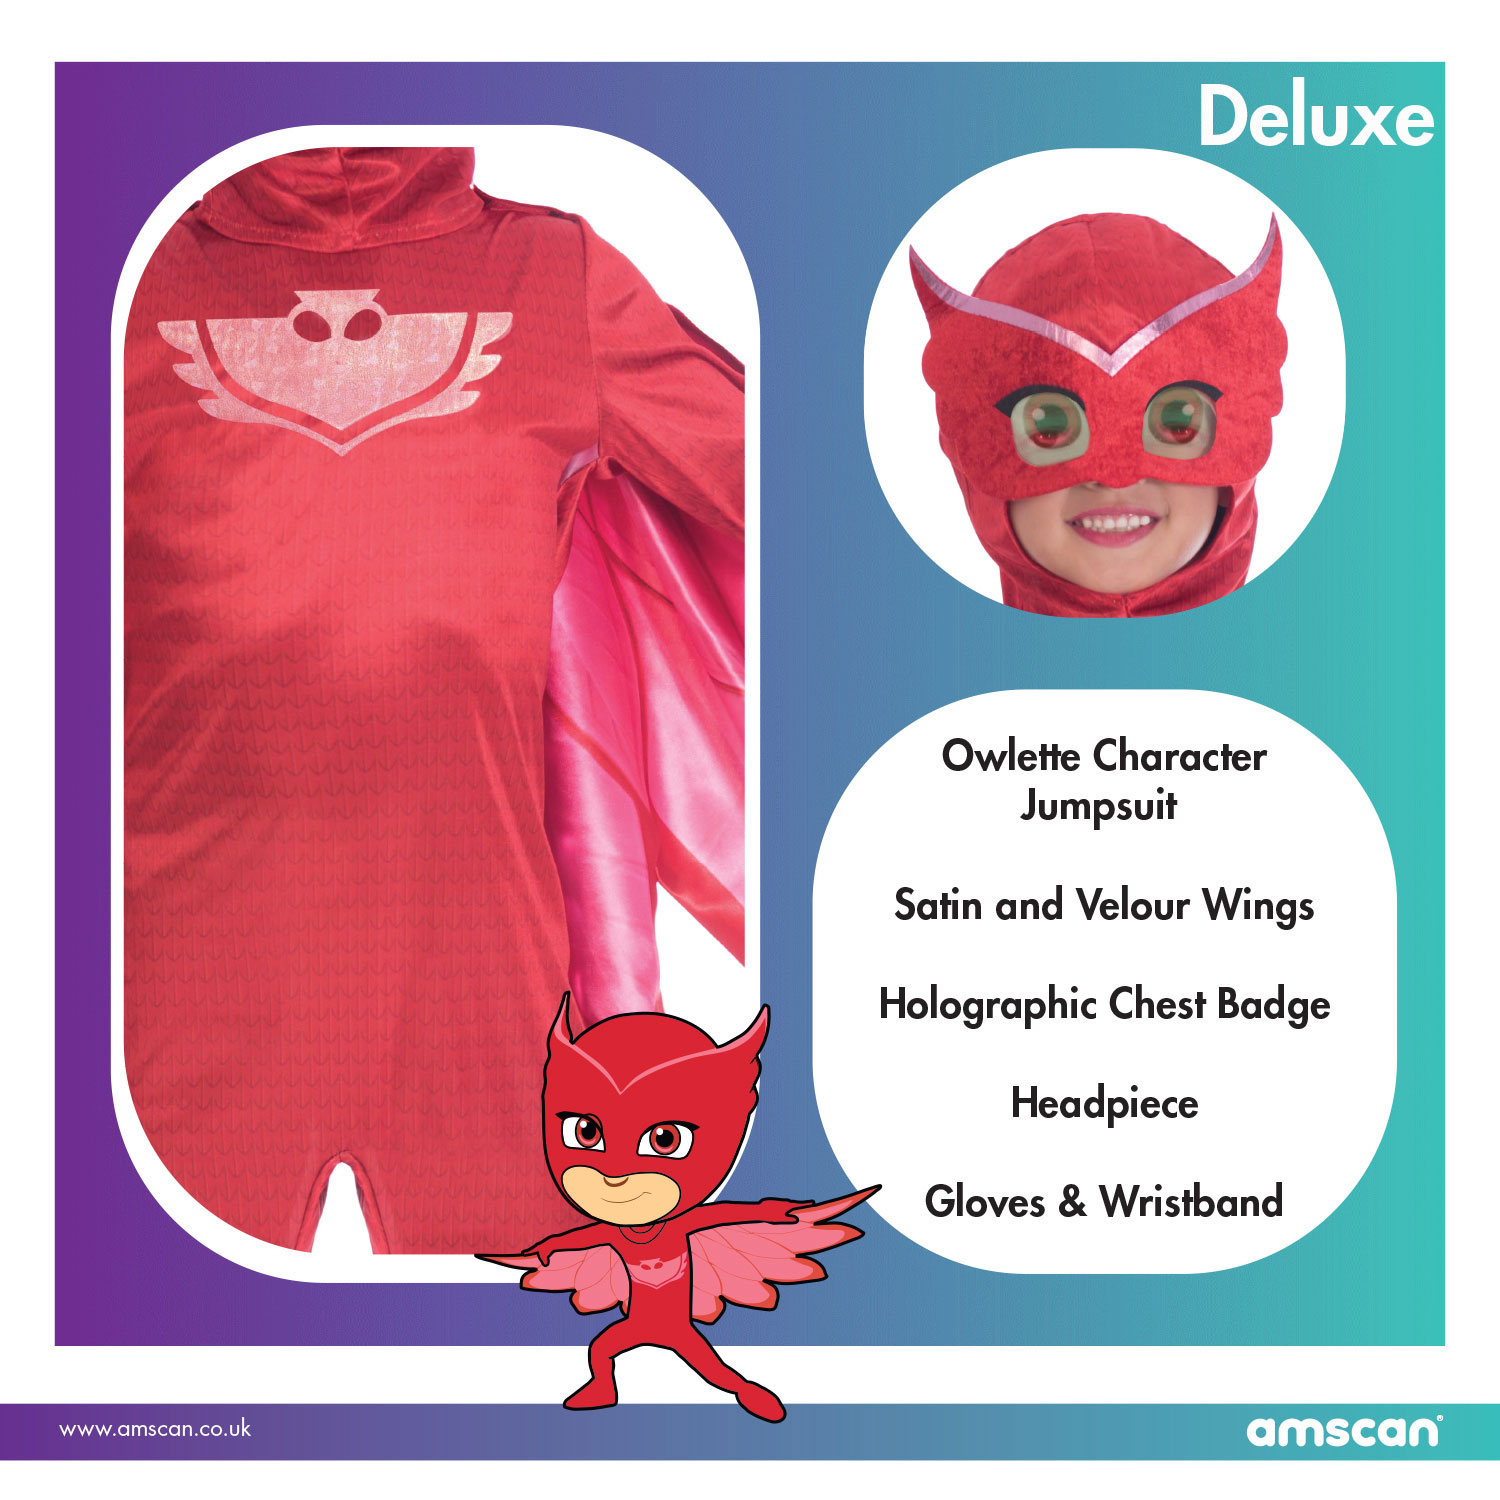 Pj Masks Owlette Deluxe Costume Age 5 6 Years 1 Pc Amscan